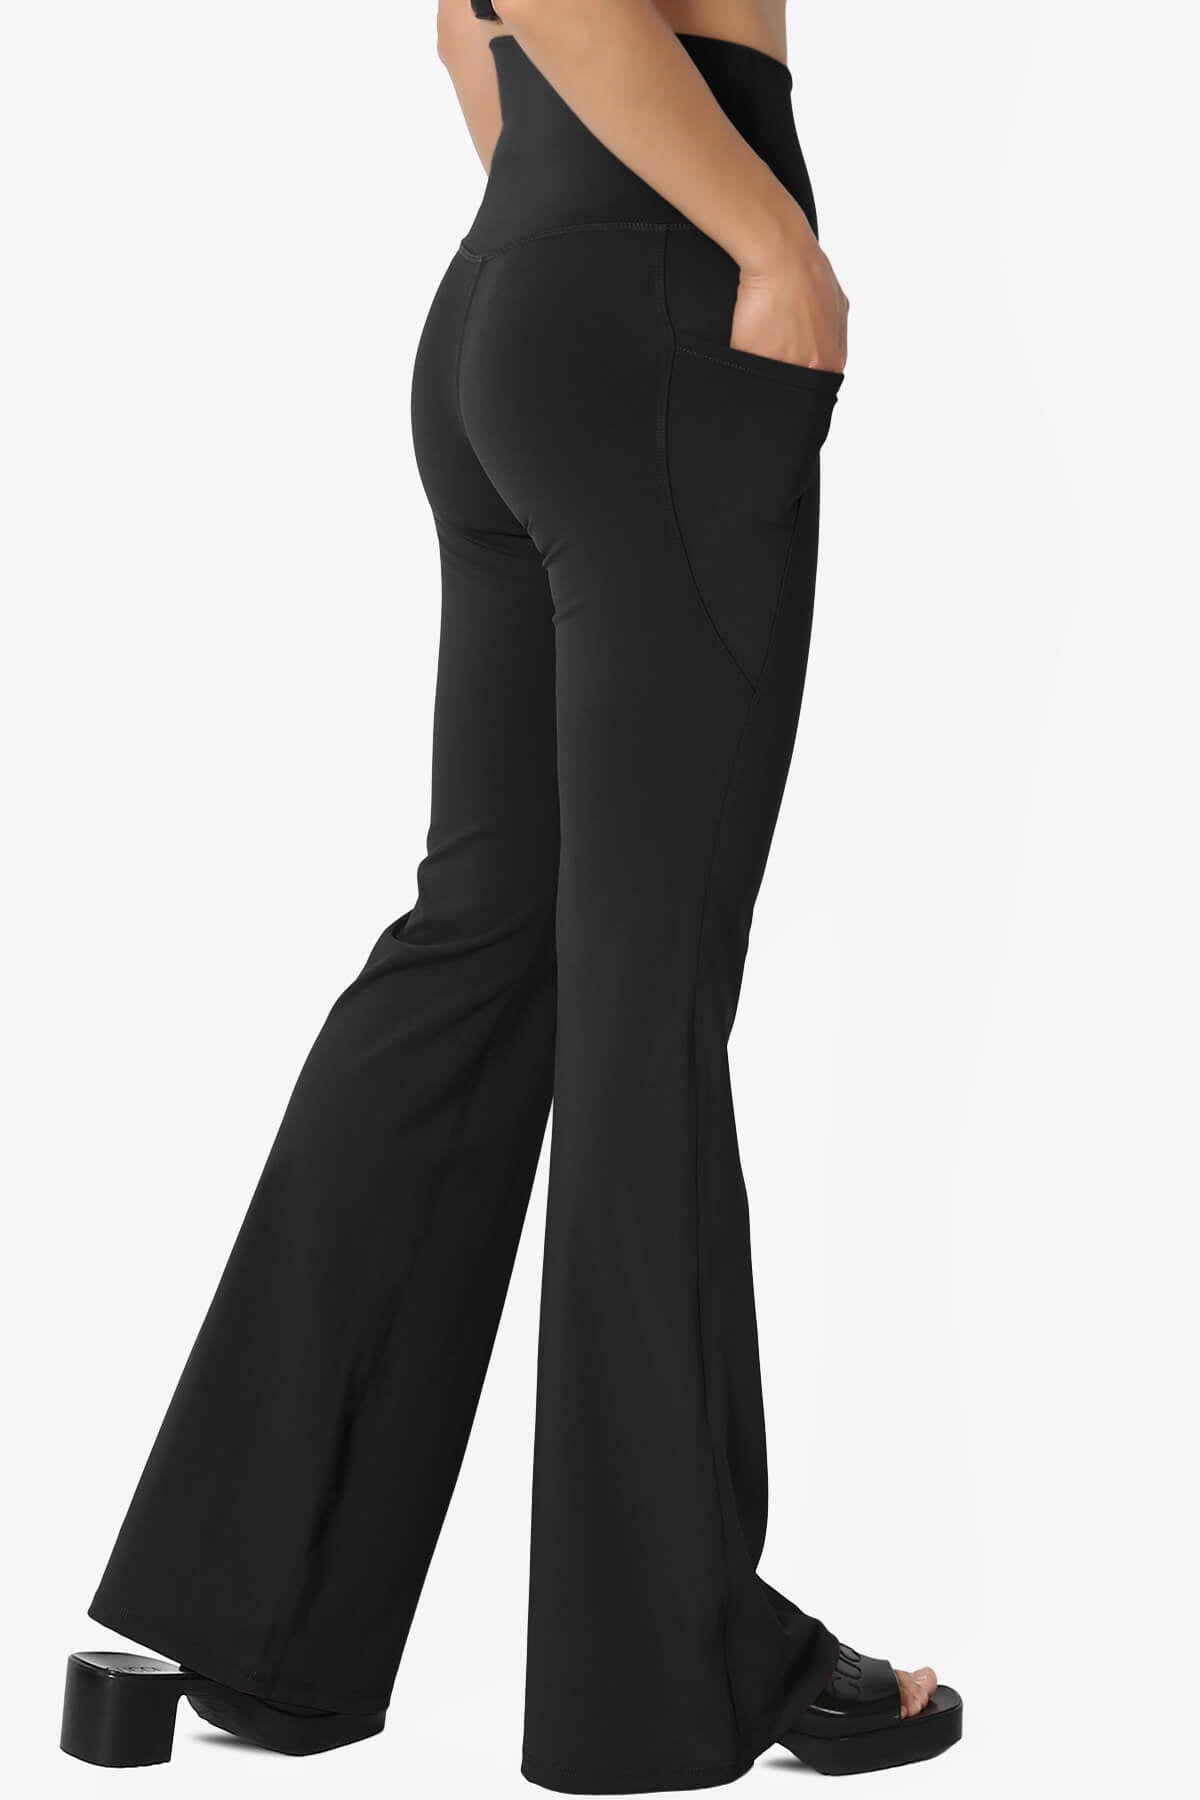 Athletic Flare Pants